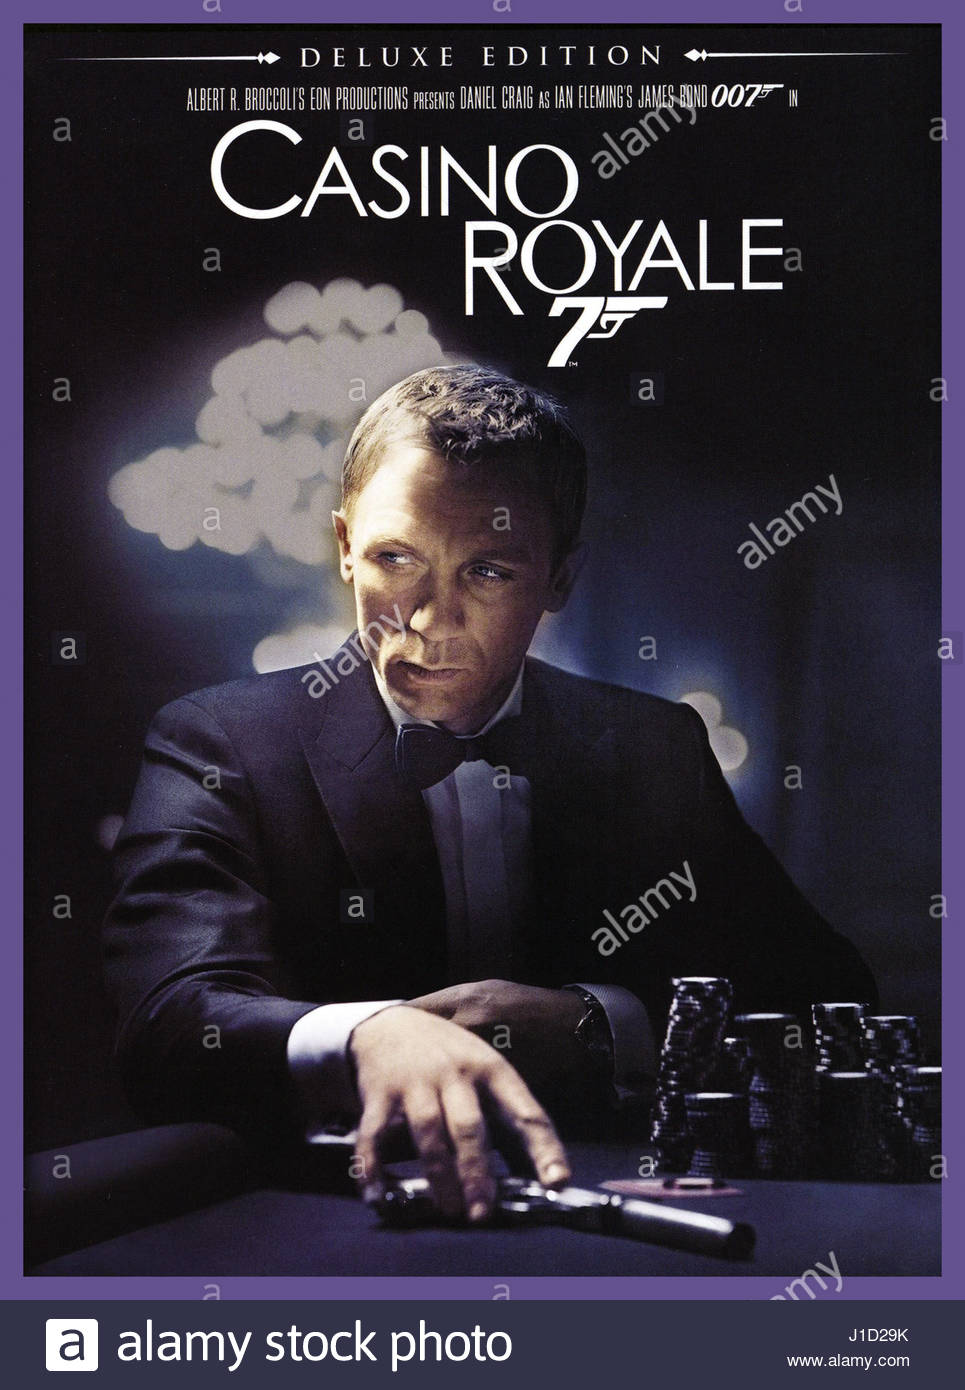 watch movie casino royale in hindi online